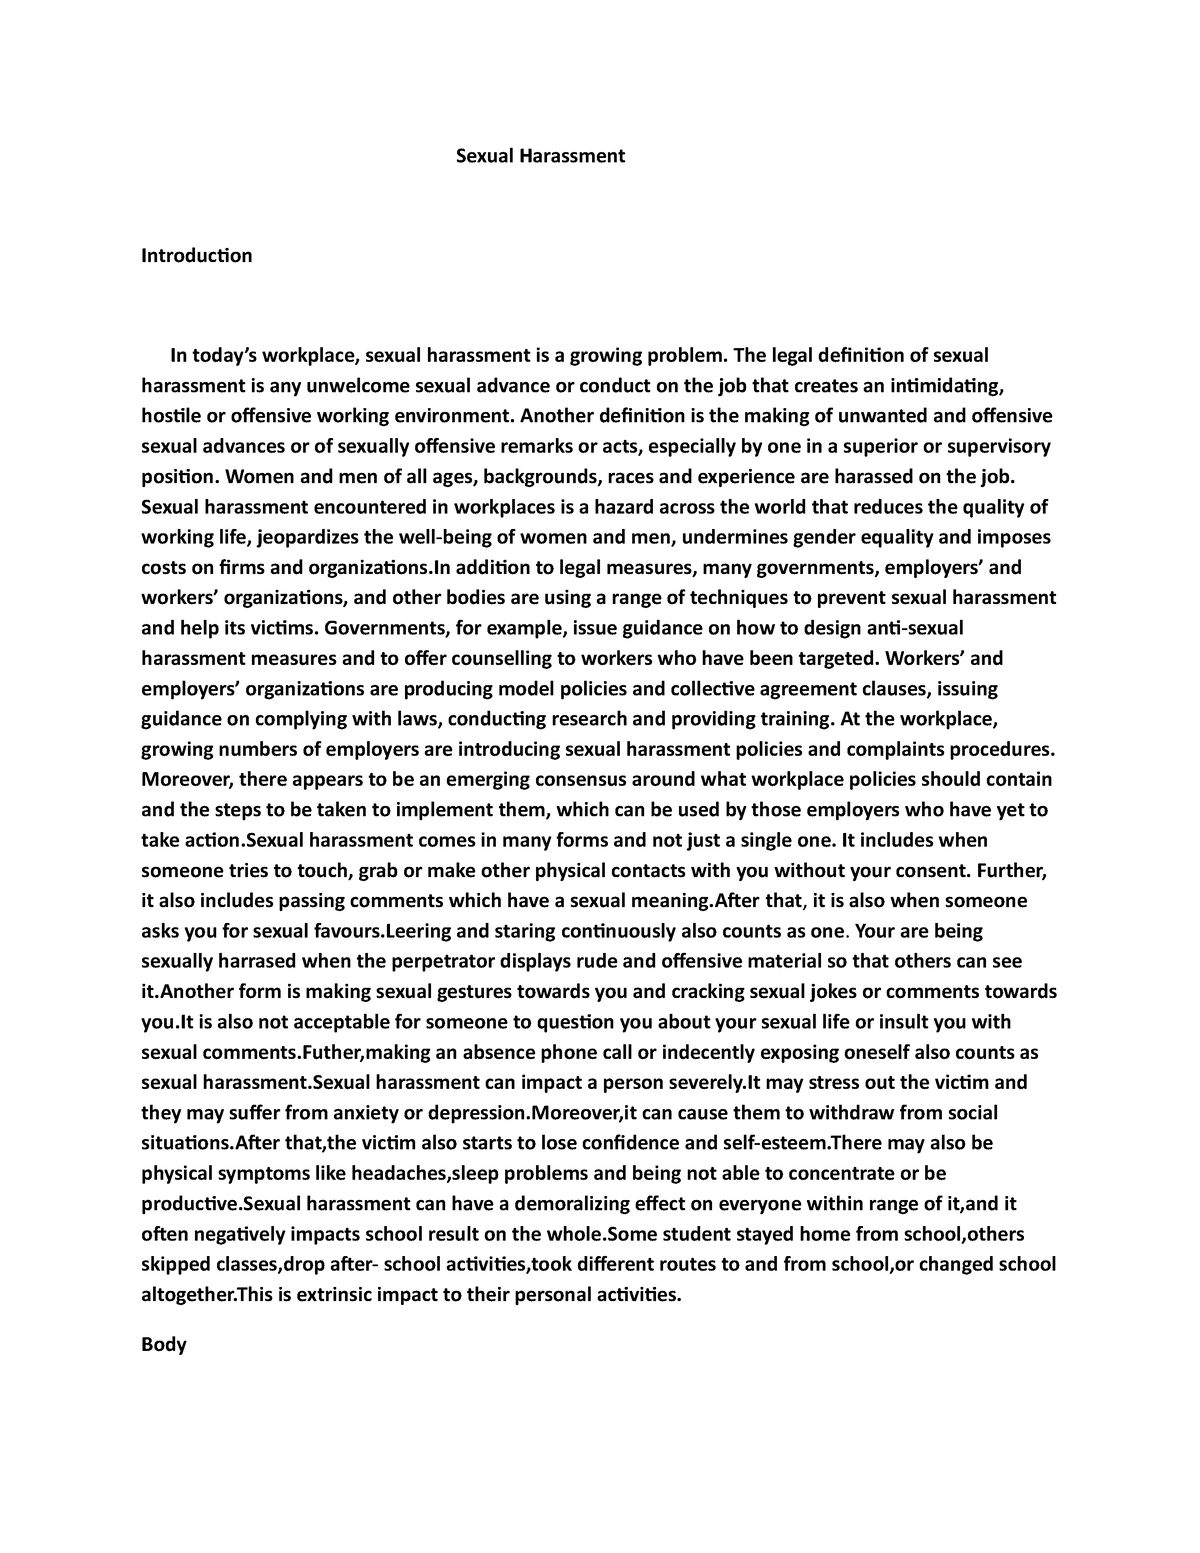 sexual harassment body essay